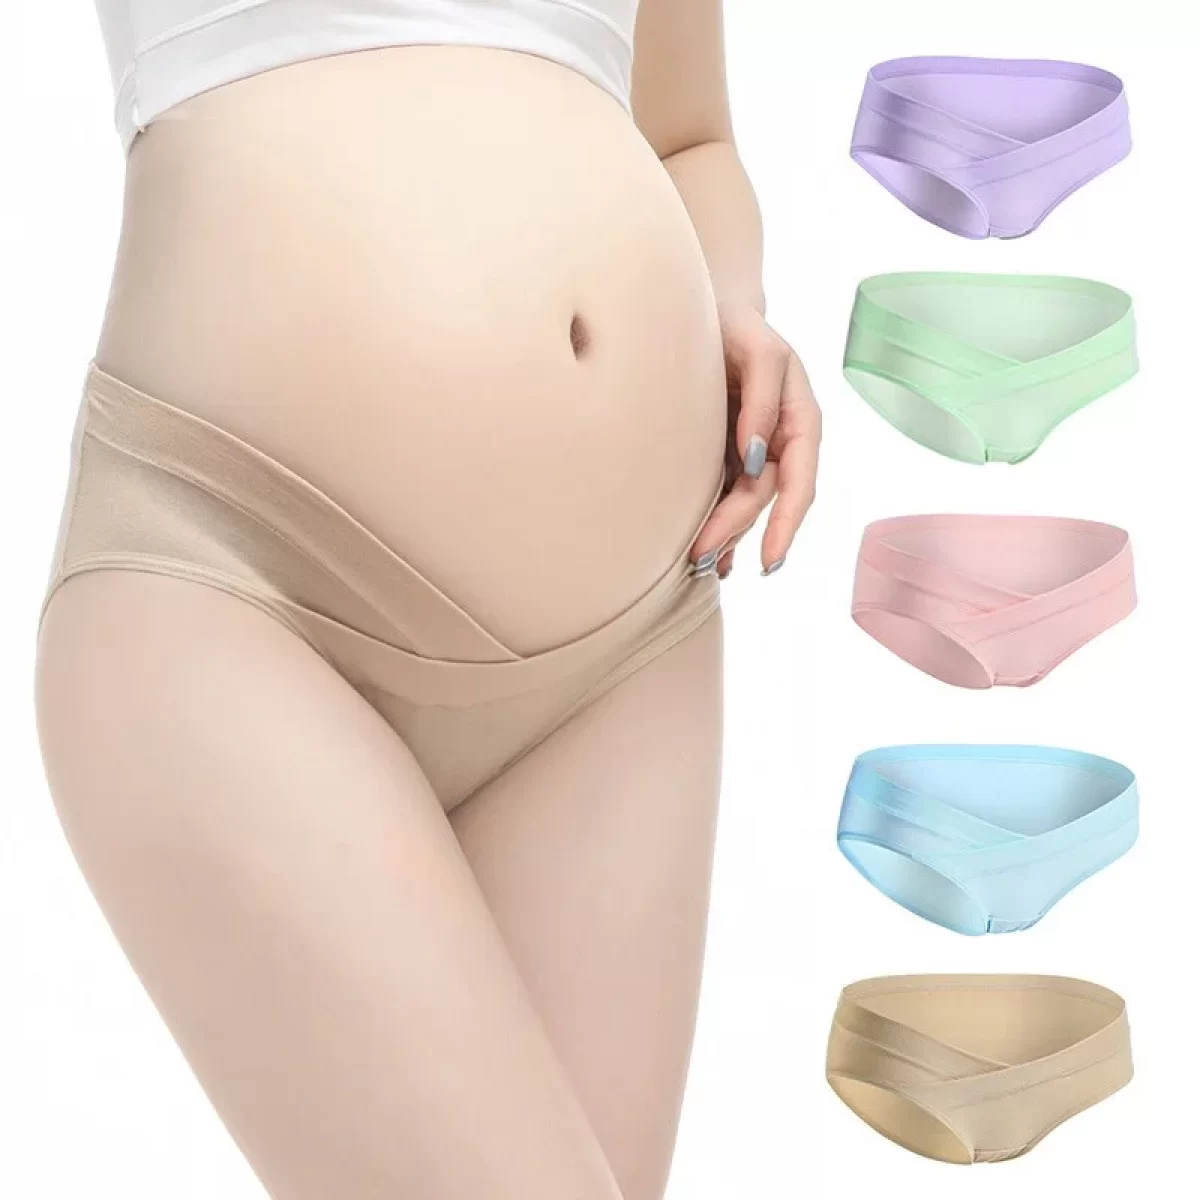 V Shape Pregnancy Panty Maternity Underwear for C-Section and